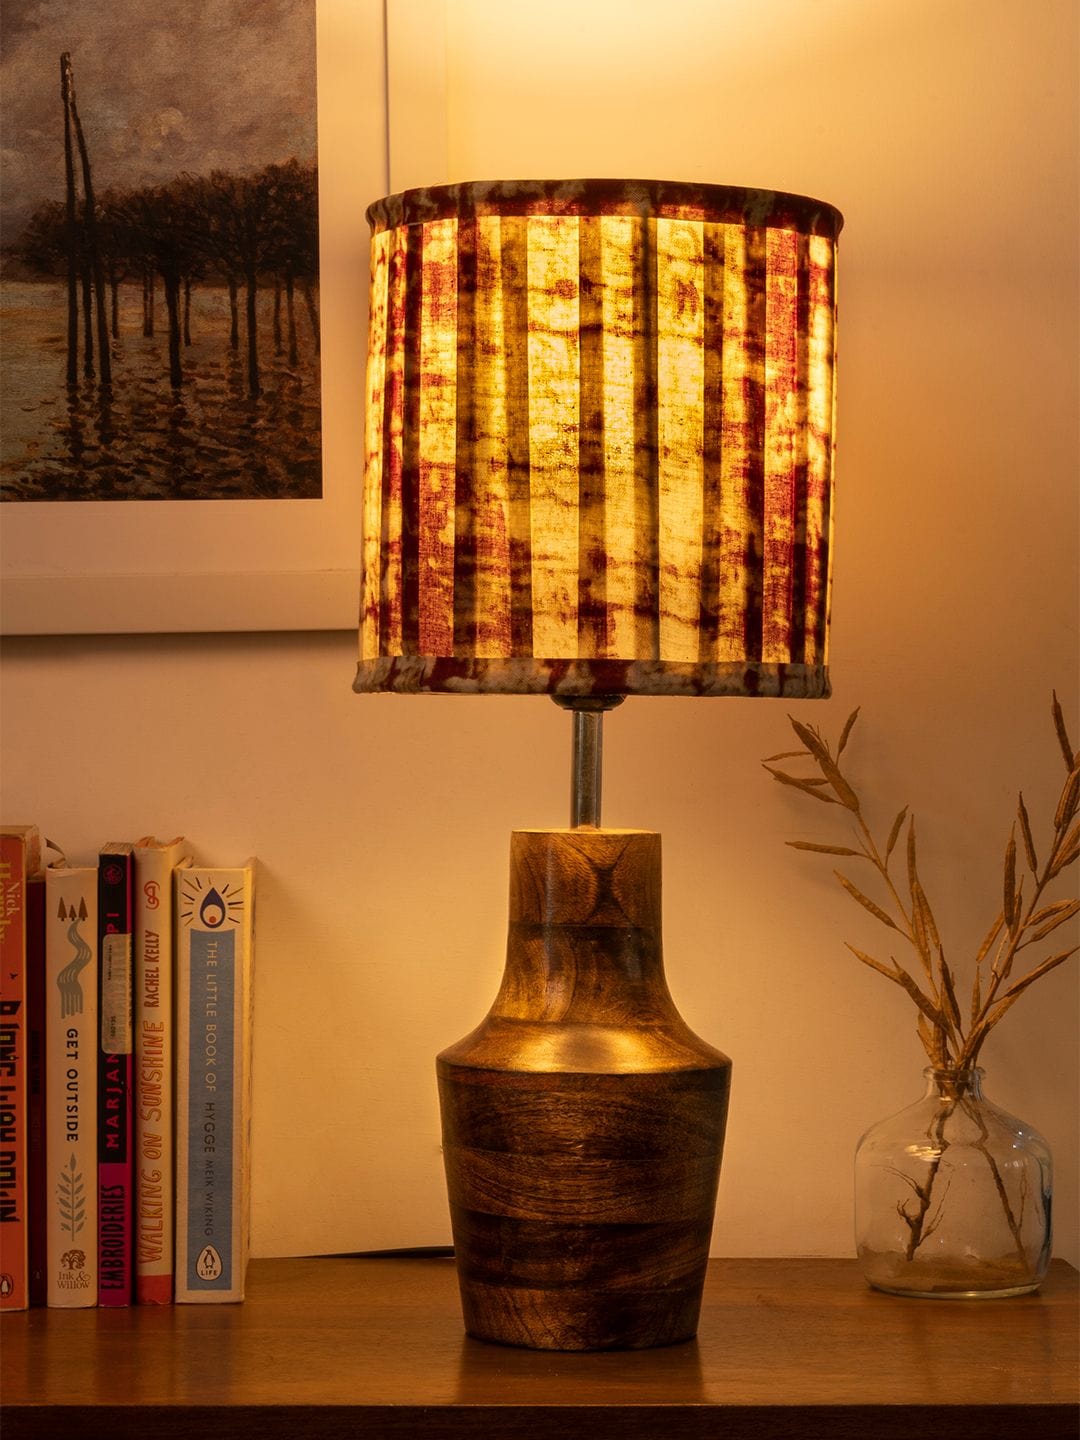 Wooden Firkin Lamp with Pleeted Multicolor Maroon Shade